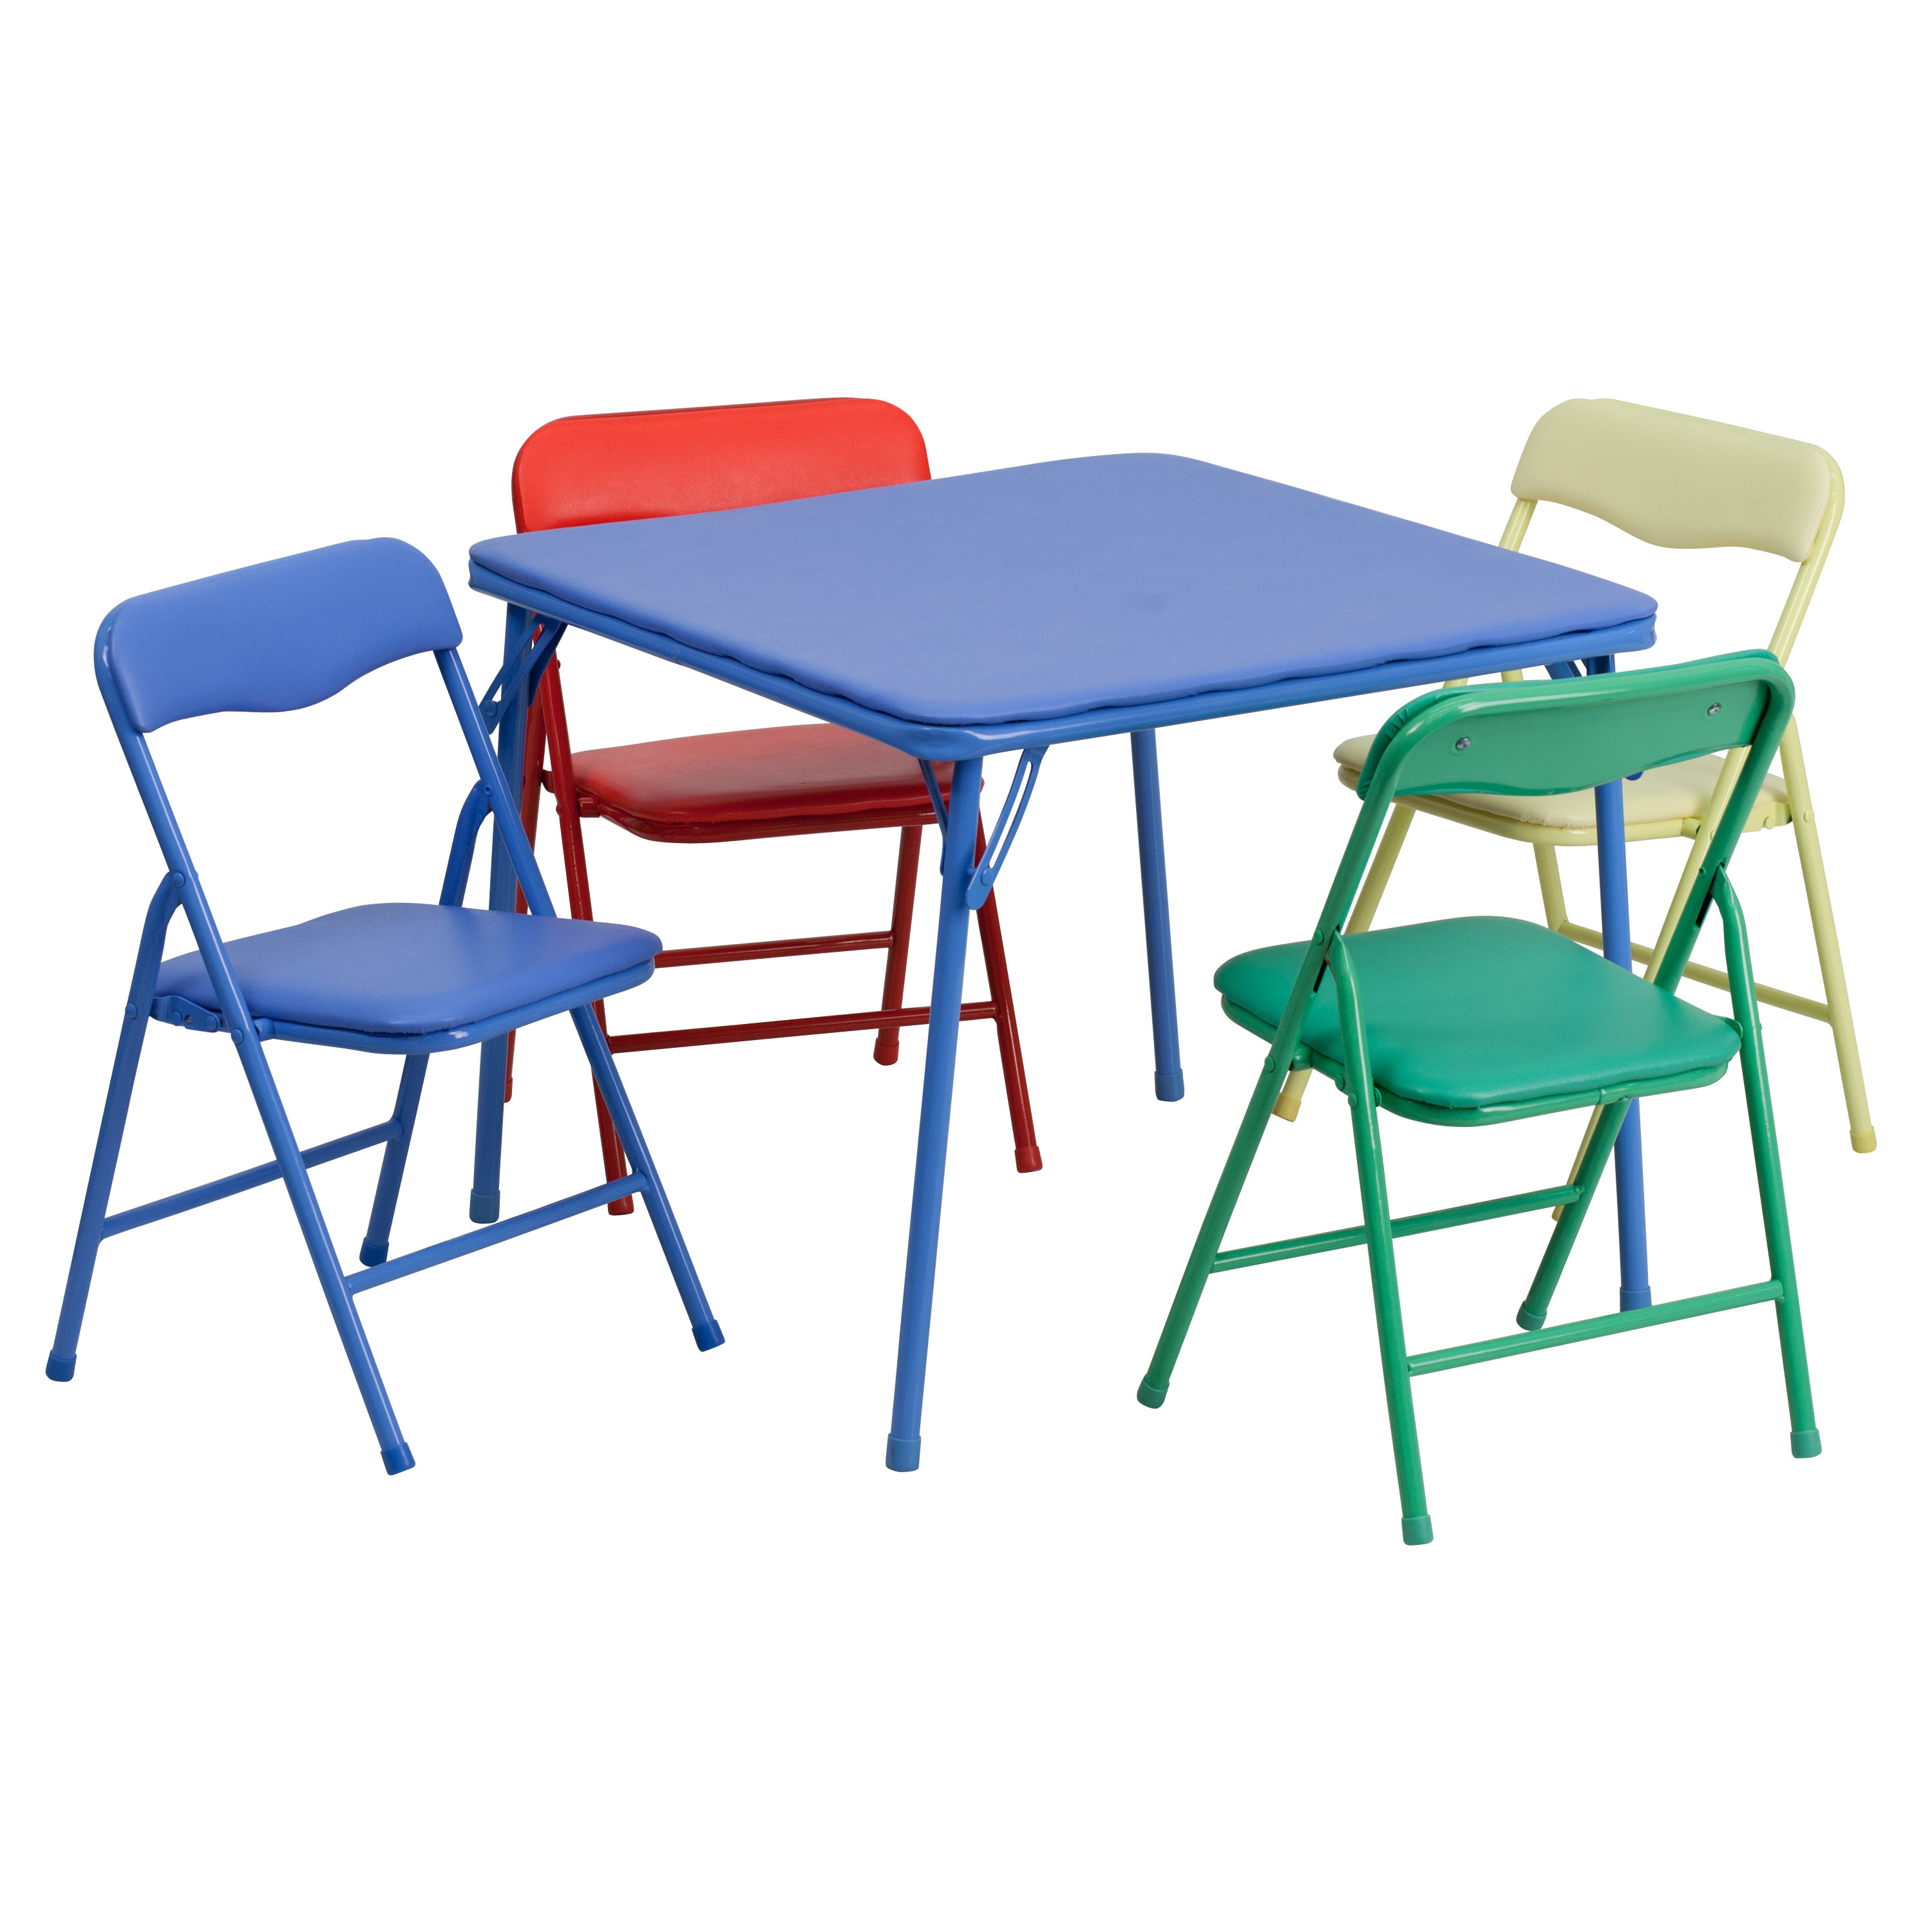 children's small plastic table and chairs